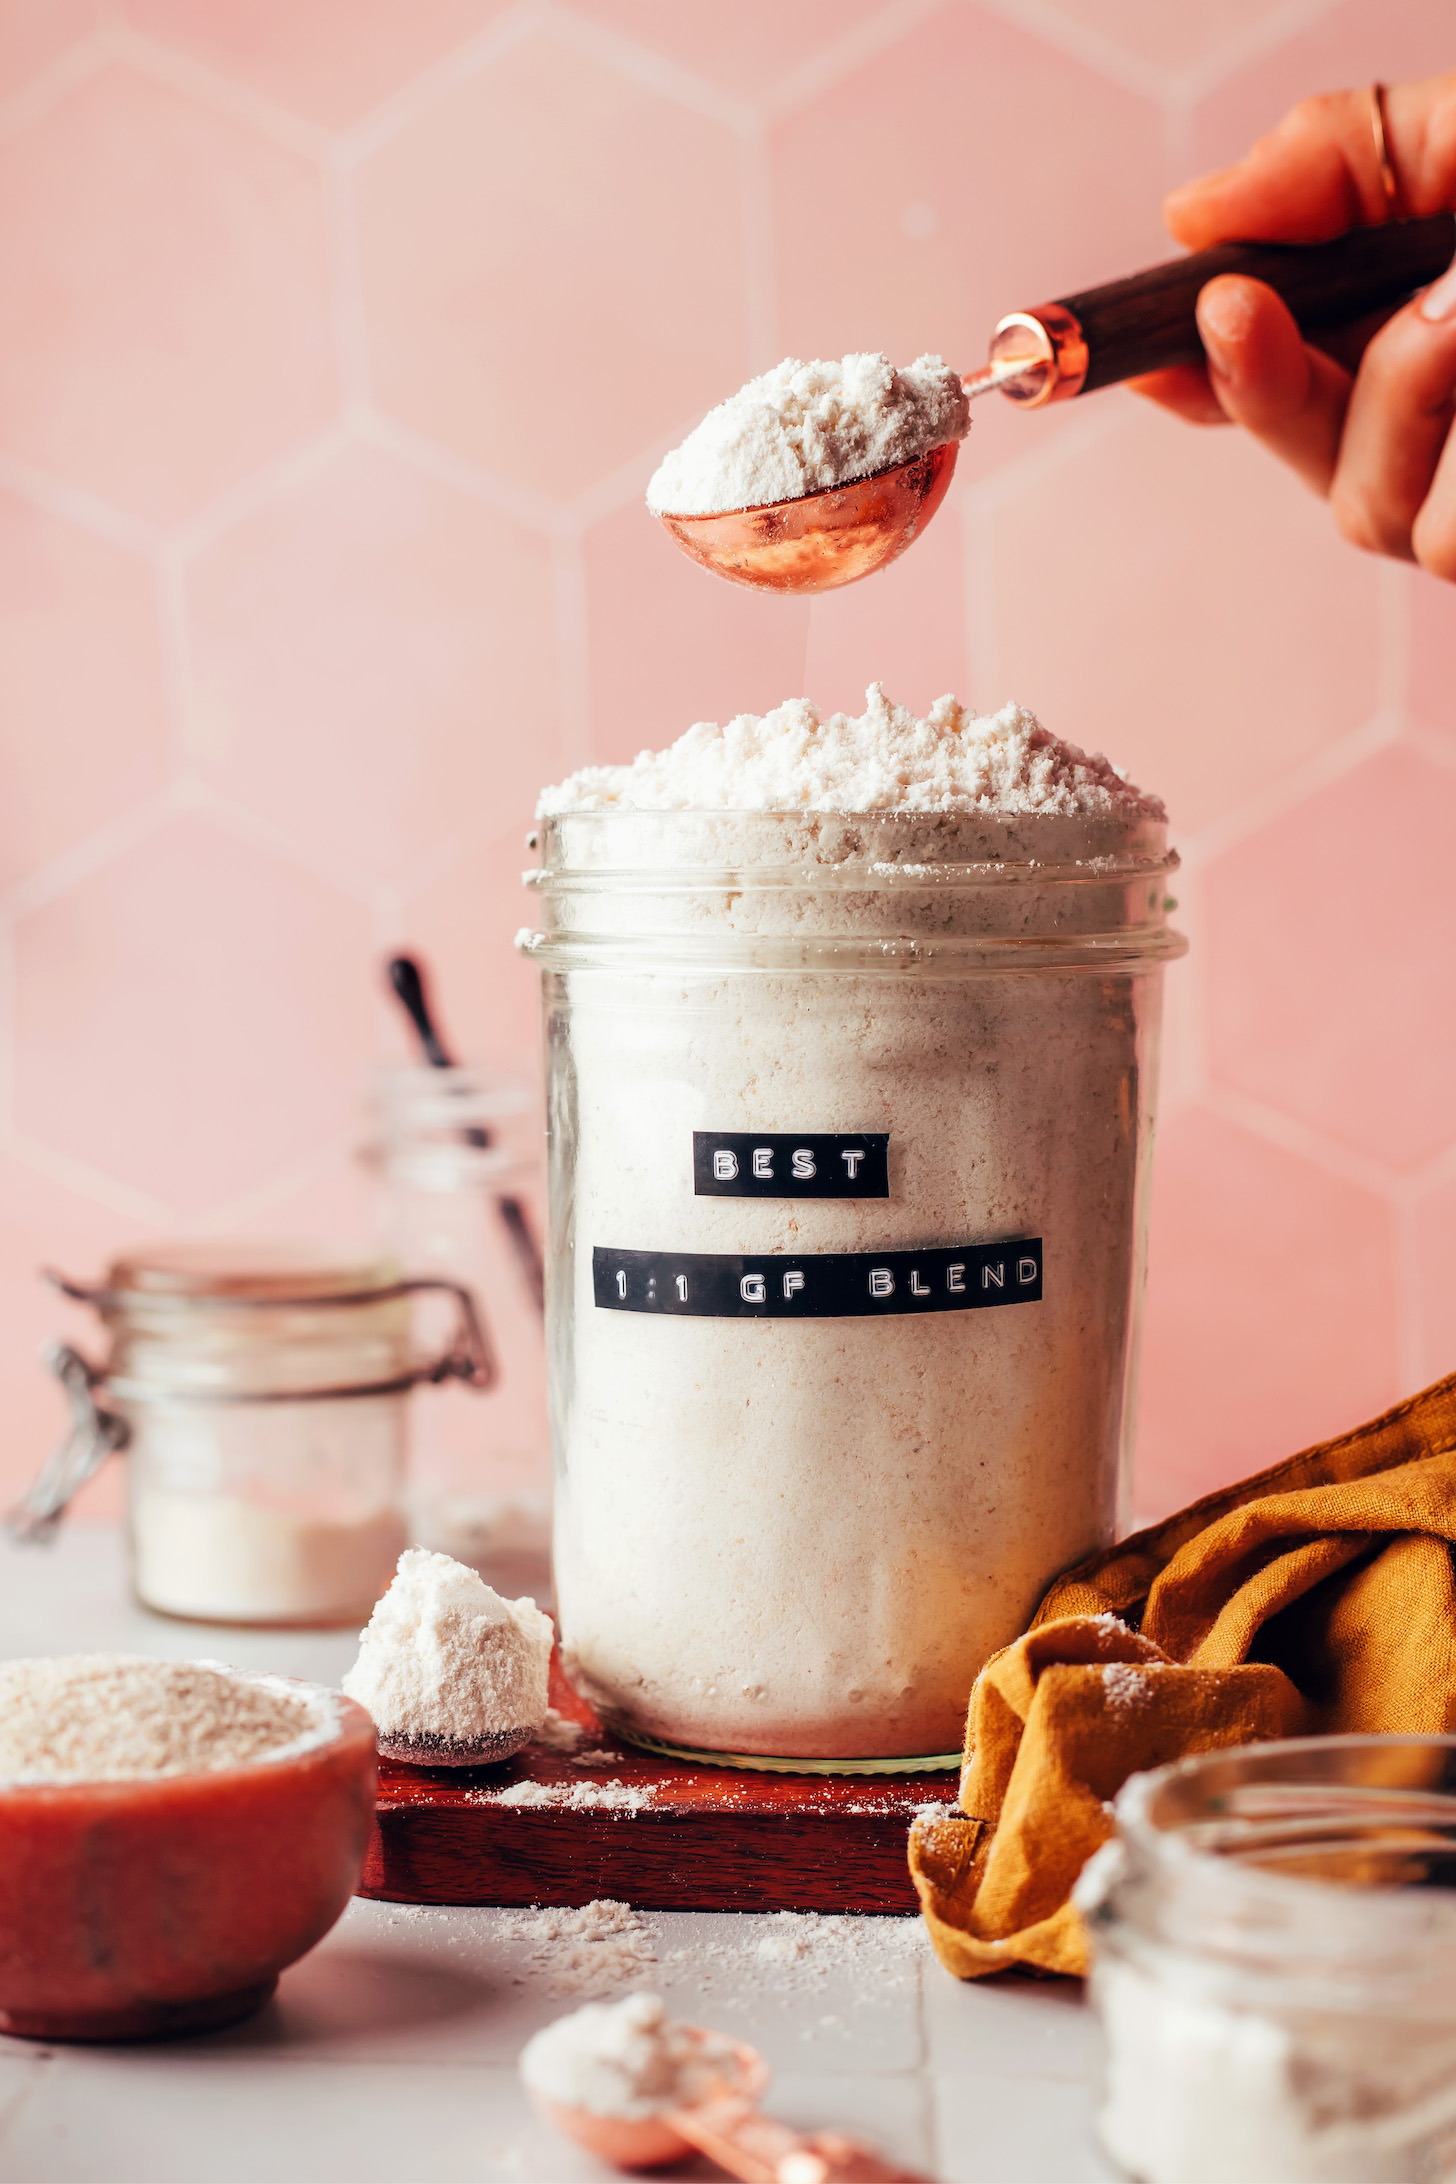 Holding a spoonful of gluten-free flour above a glass jar with more flour